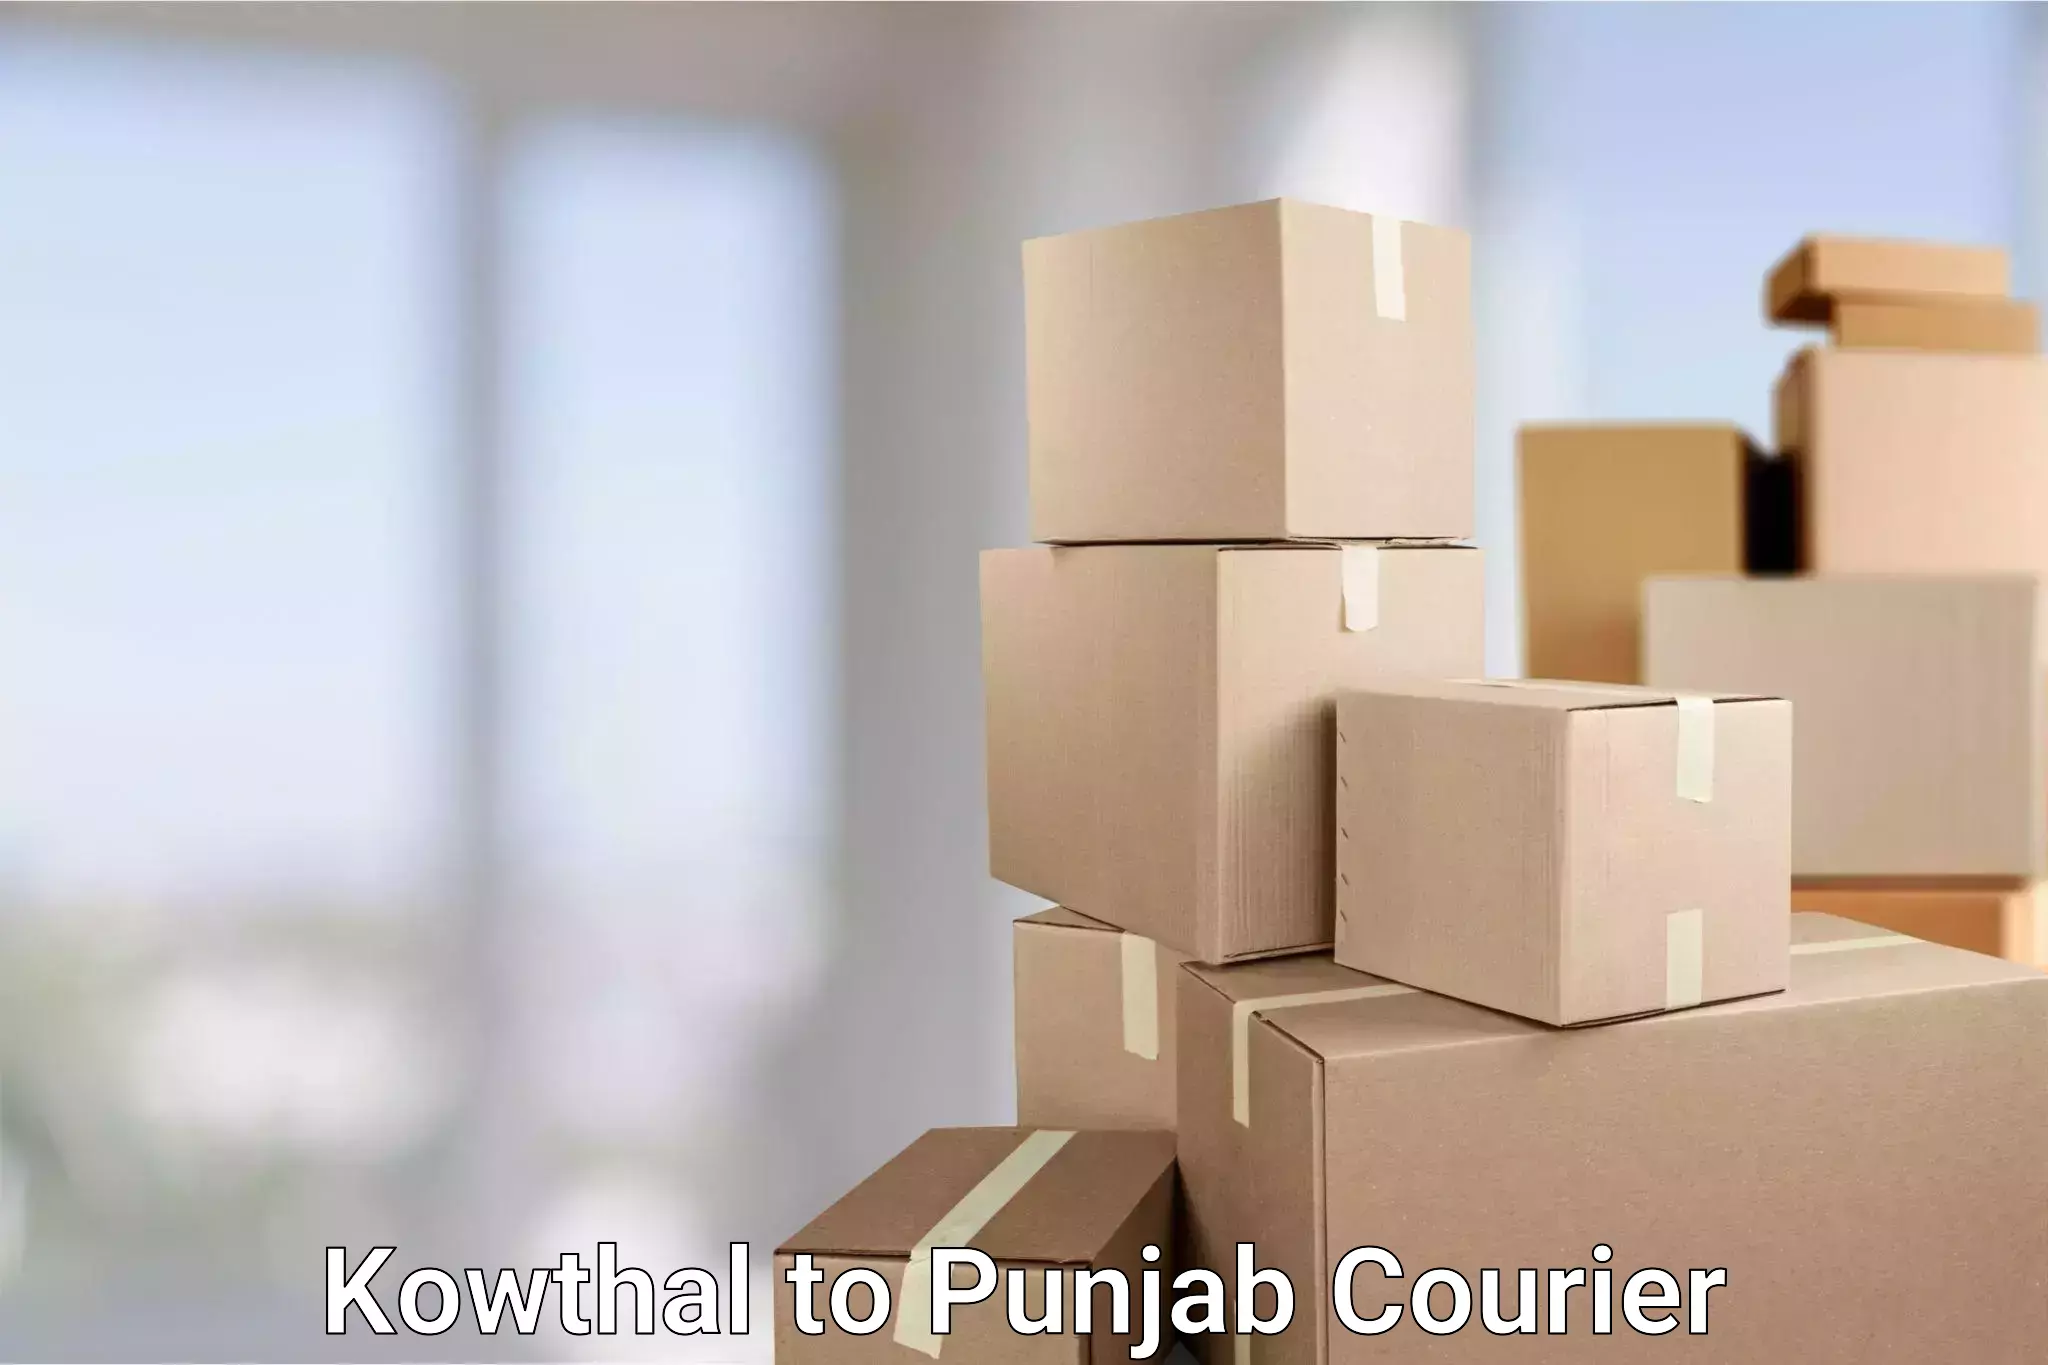 Cost-effective freight solutions Kowthal to Bathinda